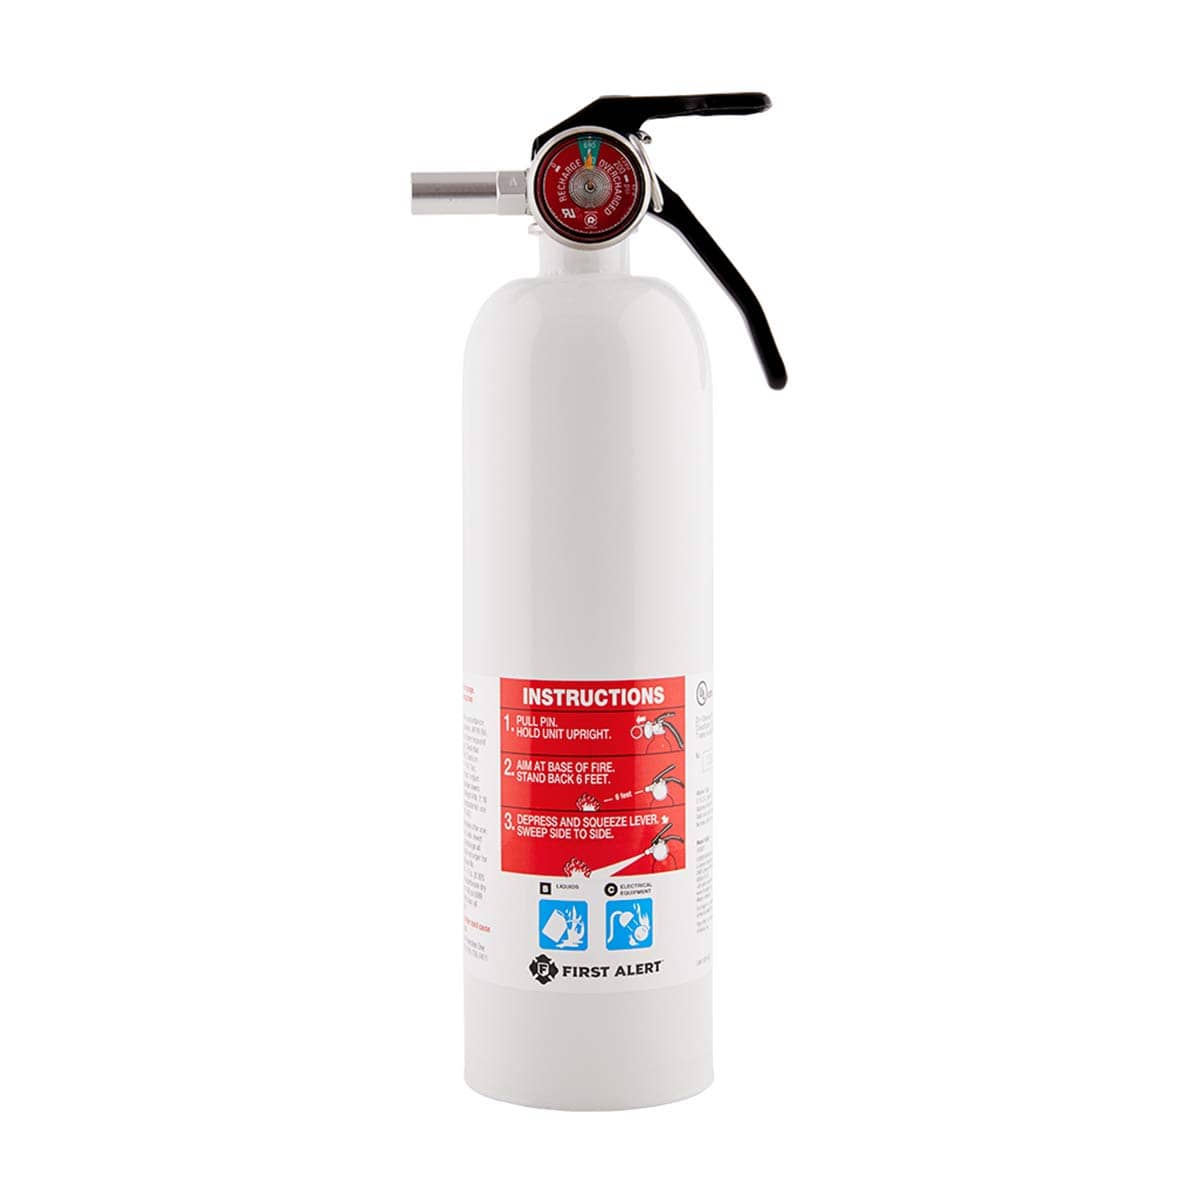 First Alert REC5 best fire extinguisher for the home and for travel